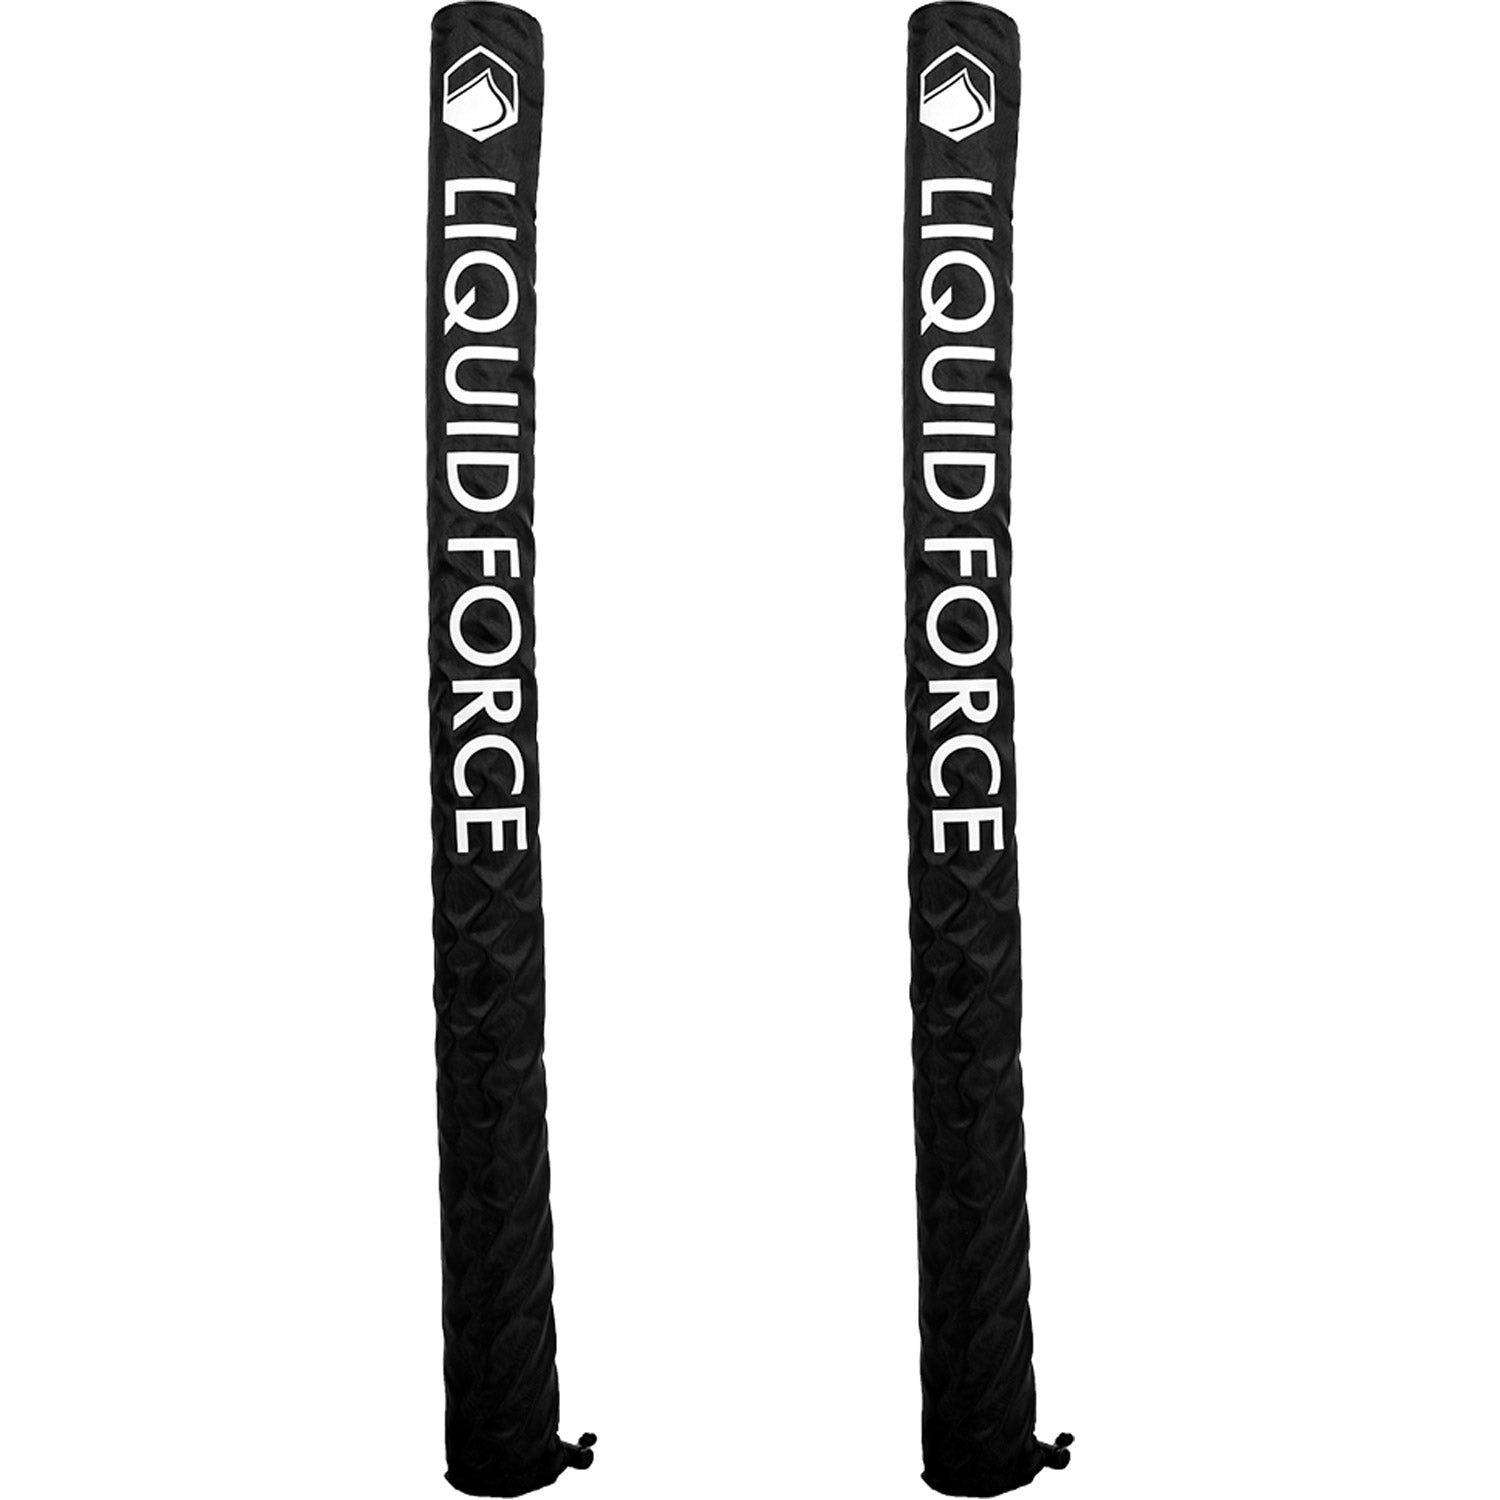 Deluxe Padded Trailer Guides